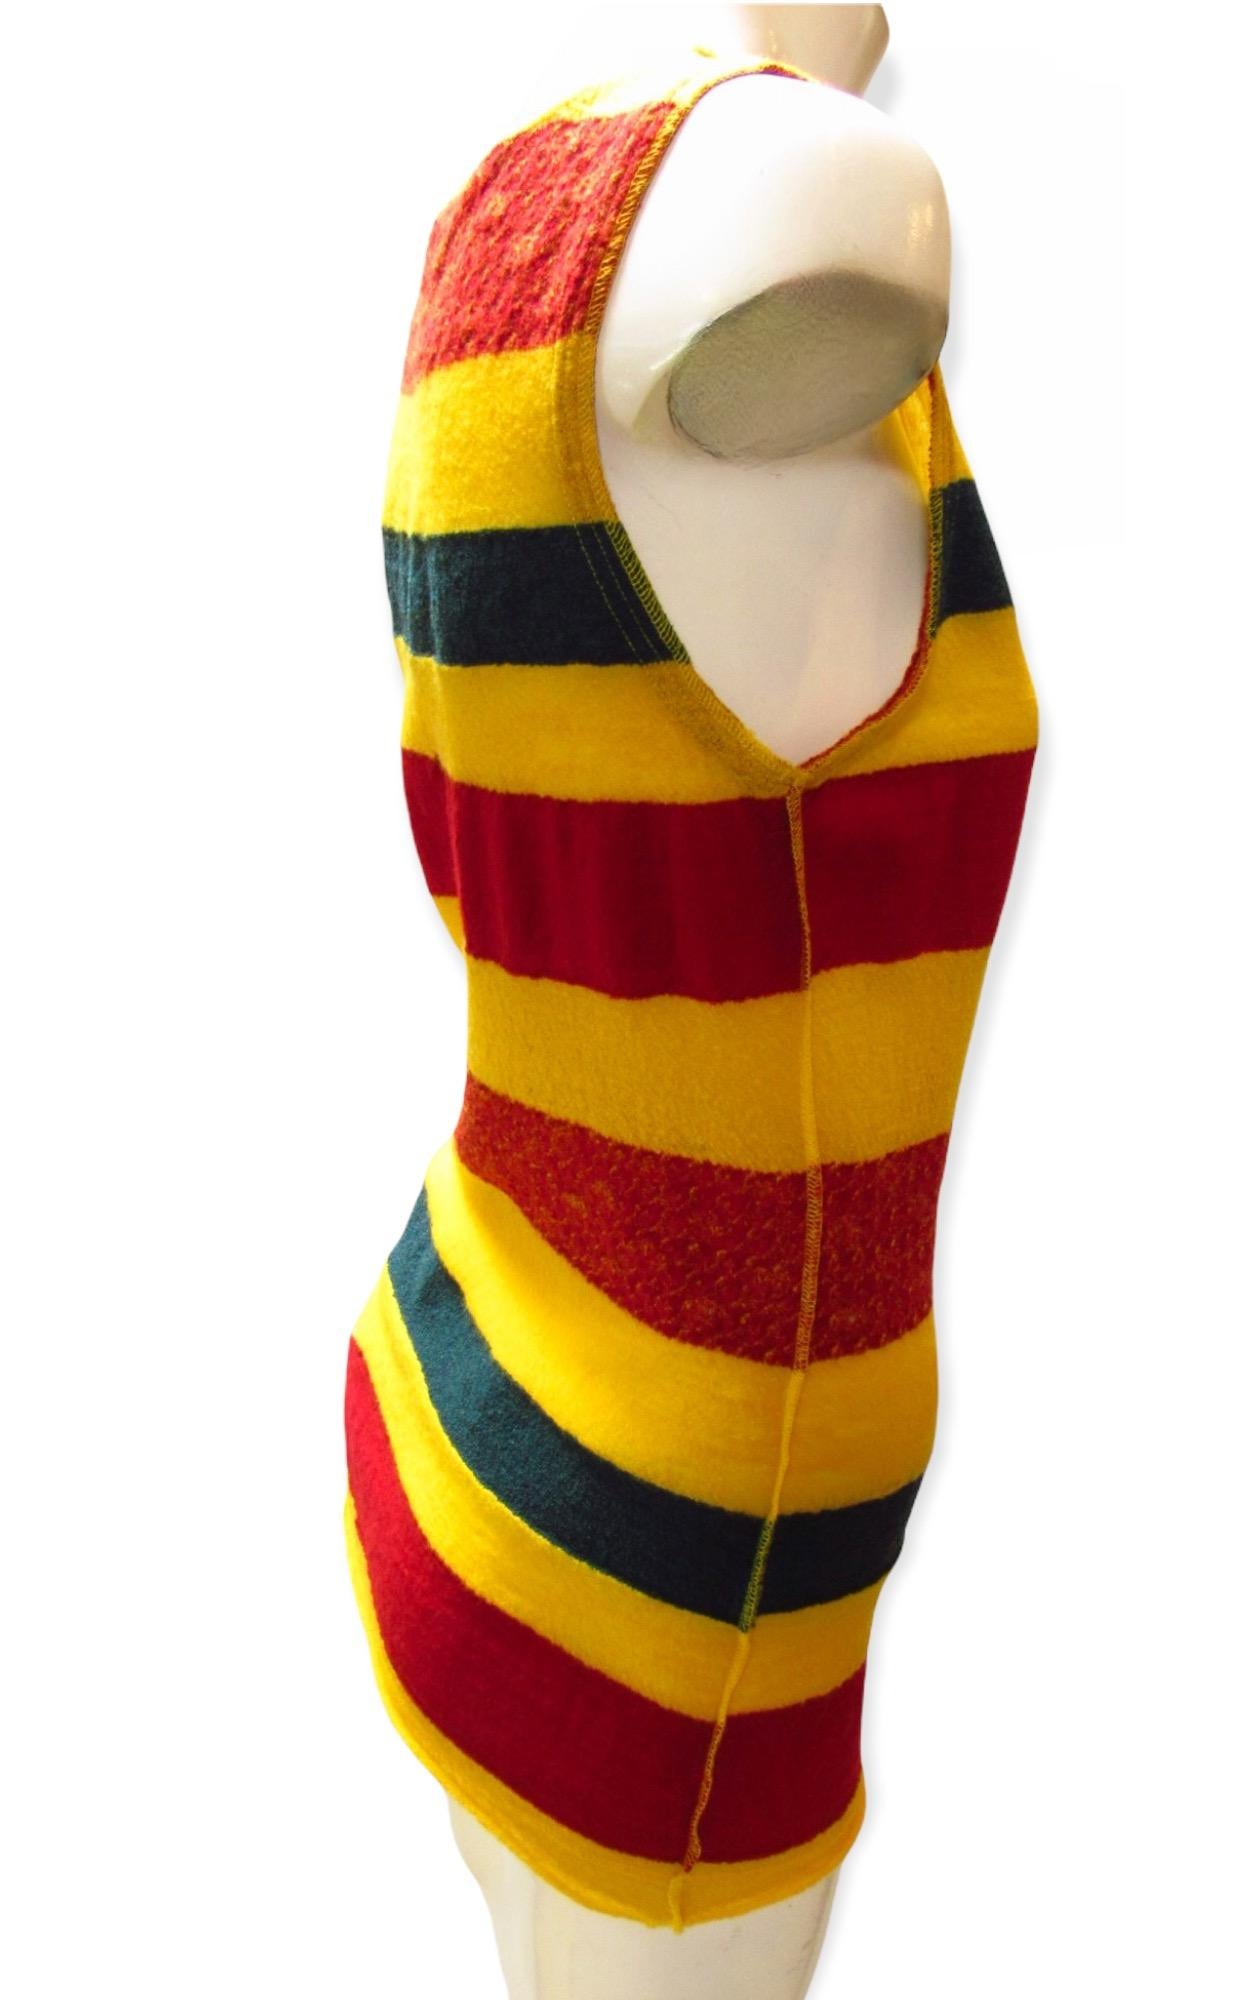 Junya Watanabe Striped Wool Tank In New Condition For Sale In Laguna Beach, CA